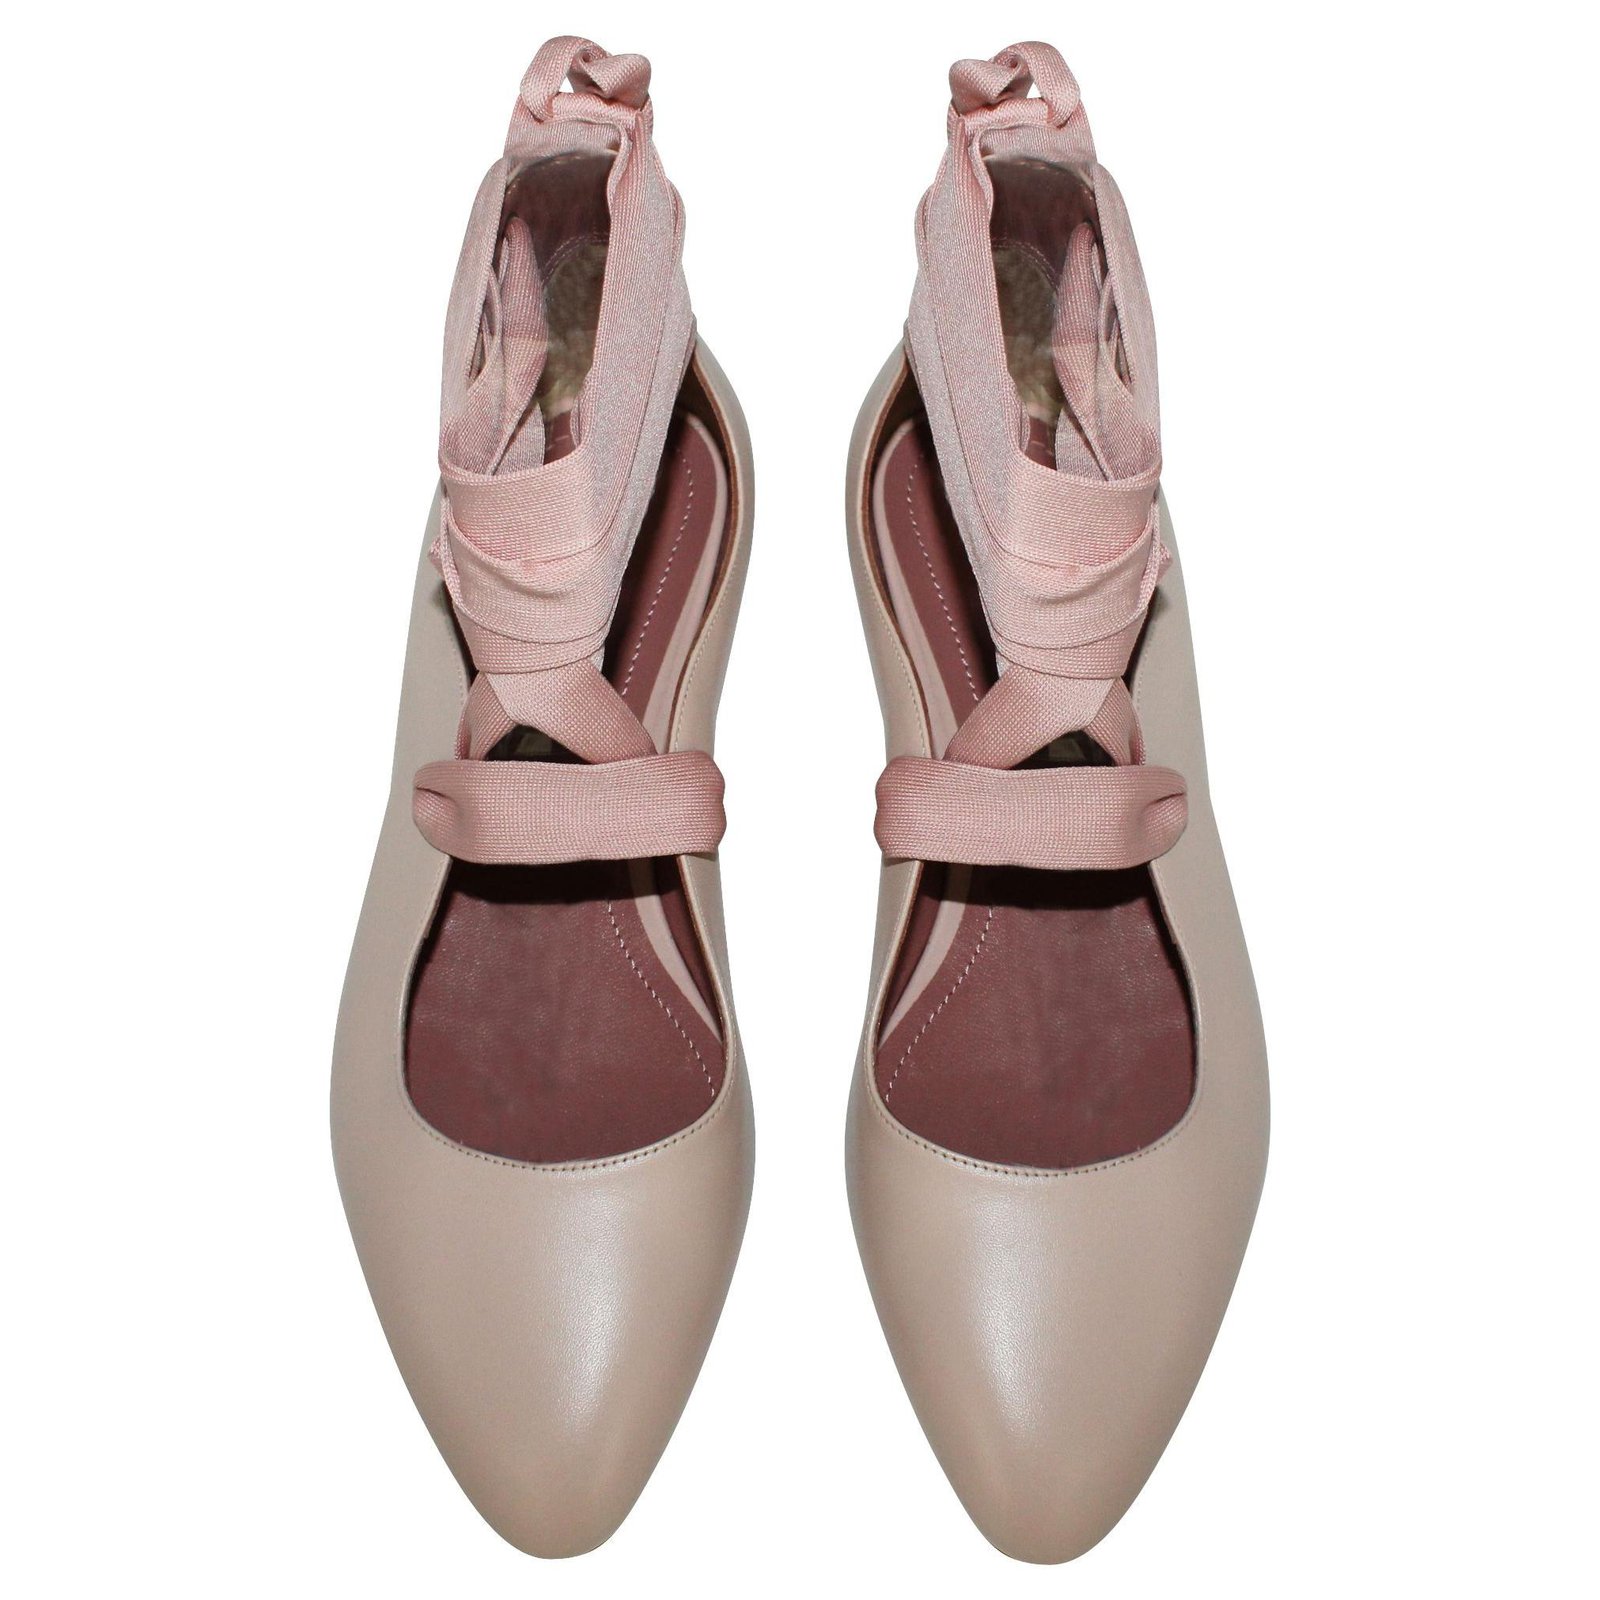 Bally Pastel Pink/Beige Lavin Lace-Up Ballerina Shoes Leather ref 